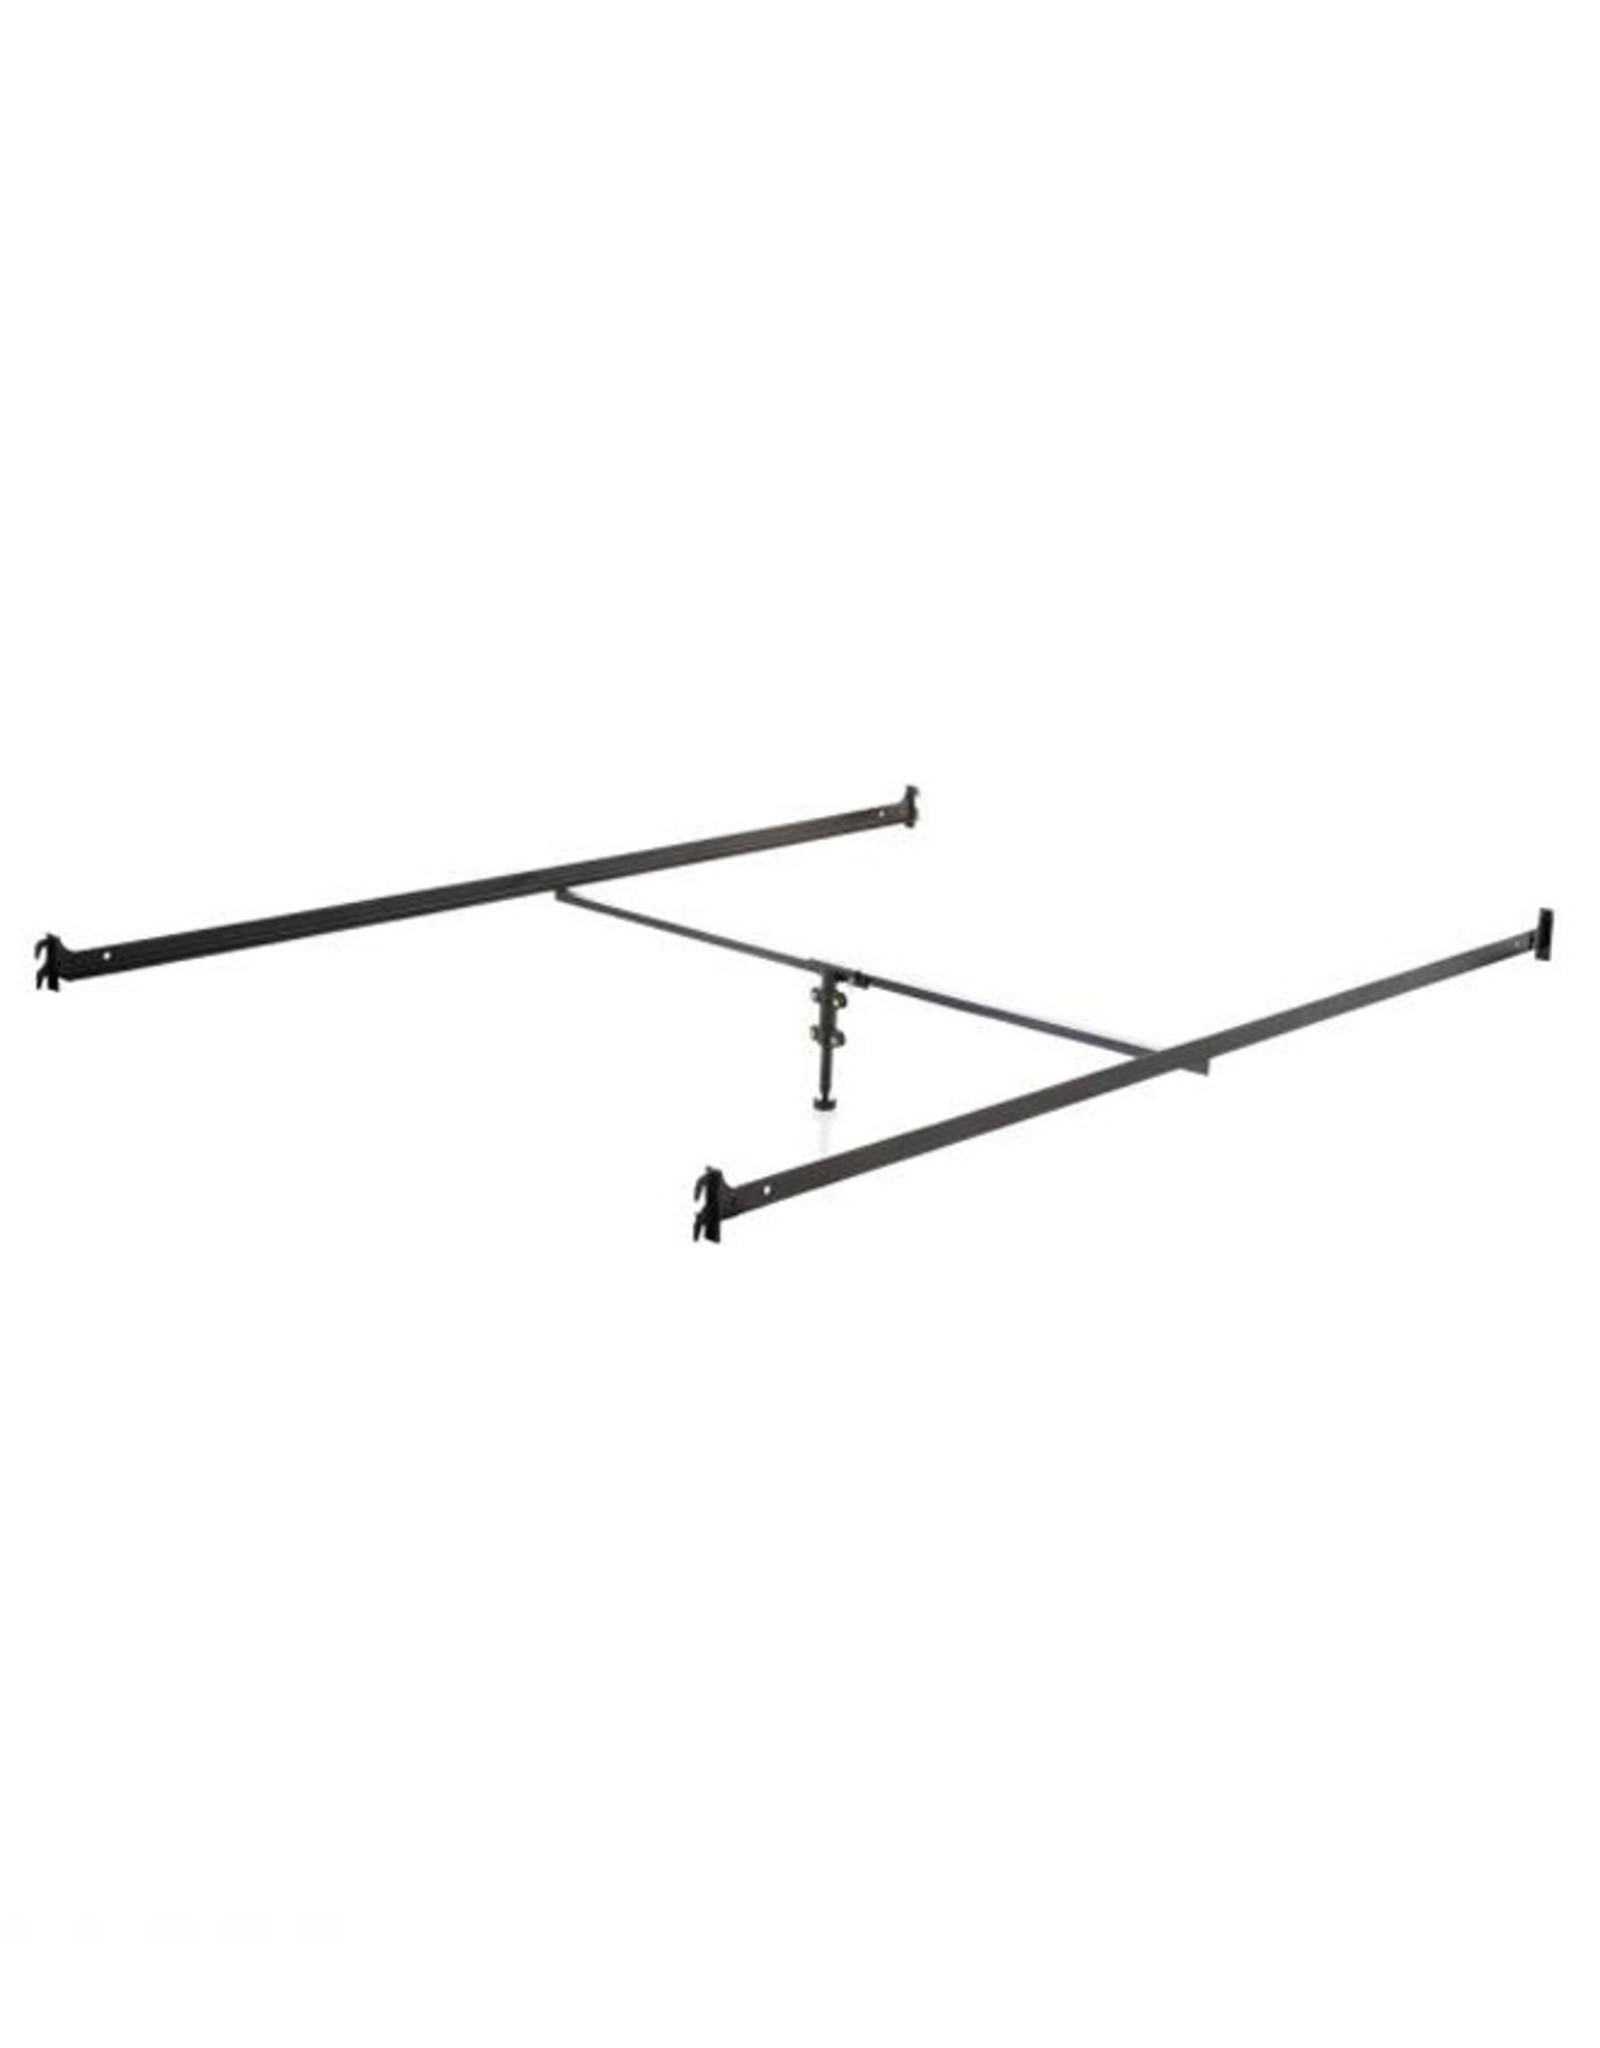 Details about   Bed Rail System Twin Full Size Hook-in Metal Sturdy Adjustable Bed Rails Bracket 